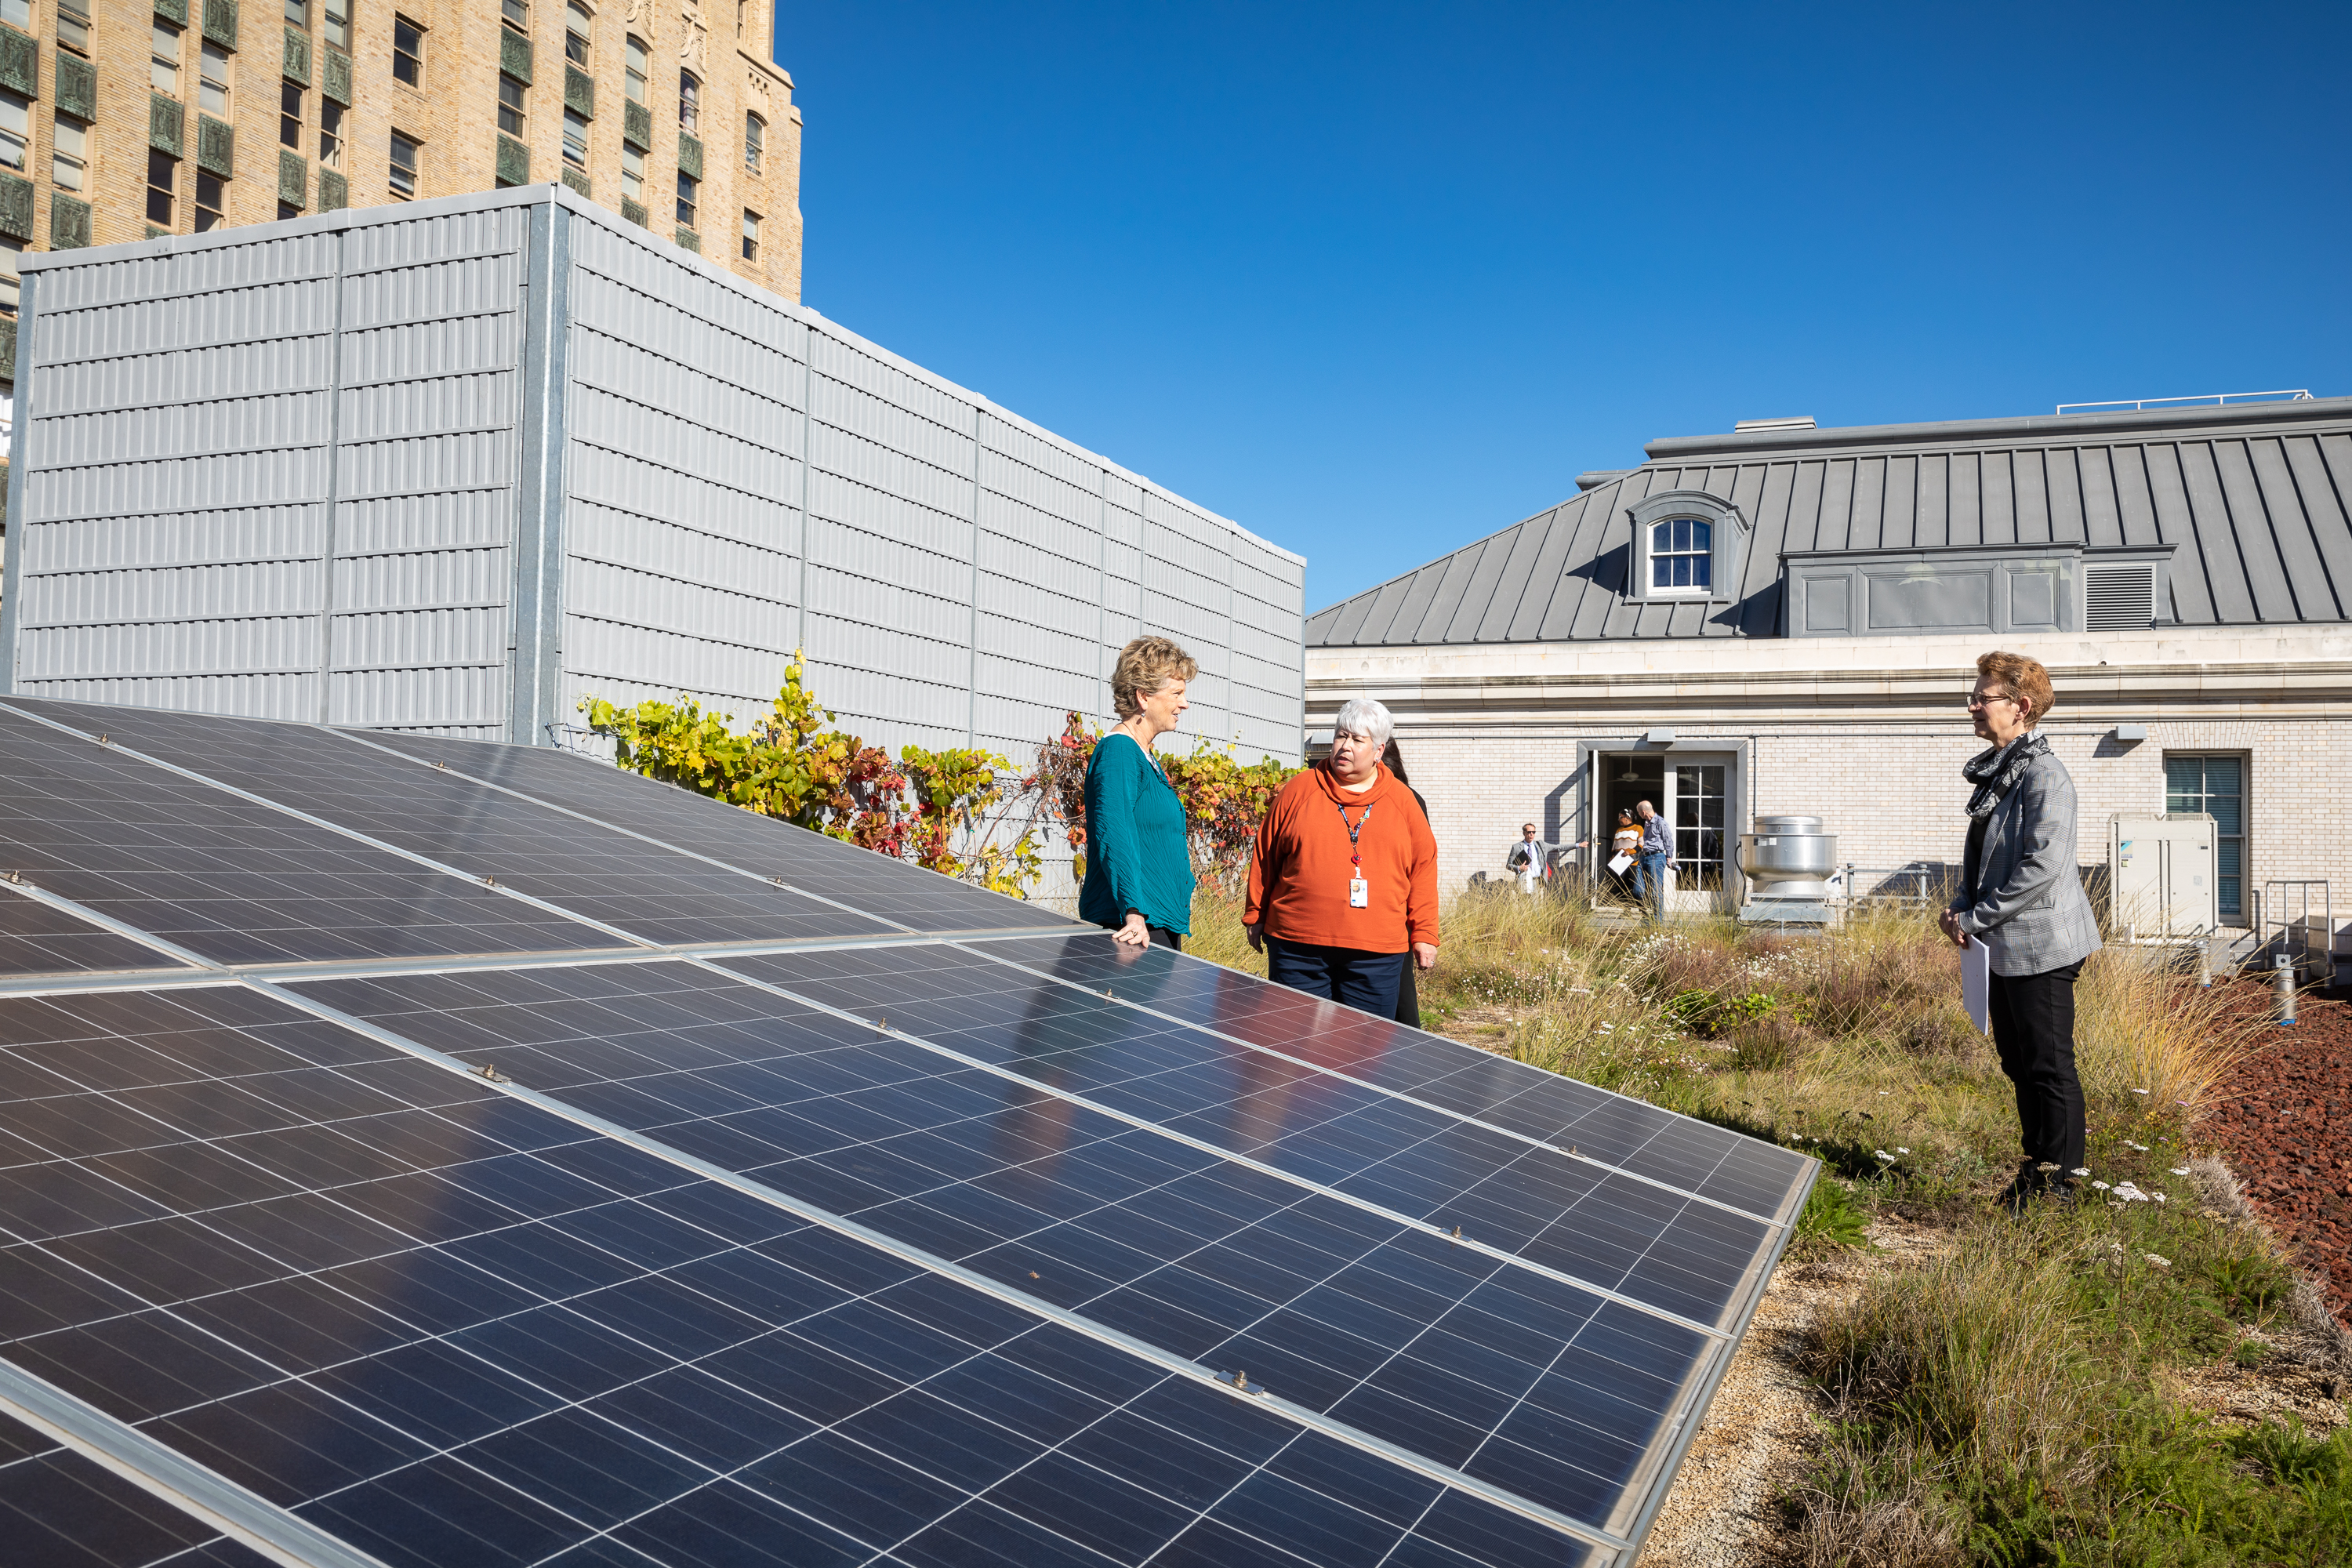 Three women stand near a solar panel on the green roof of a building with a cityscape in the background